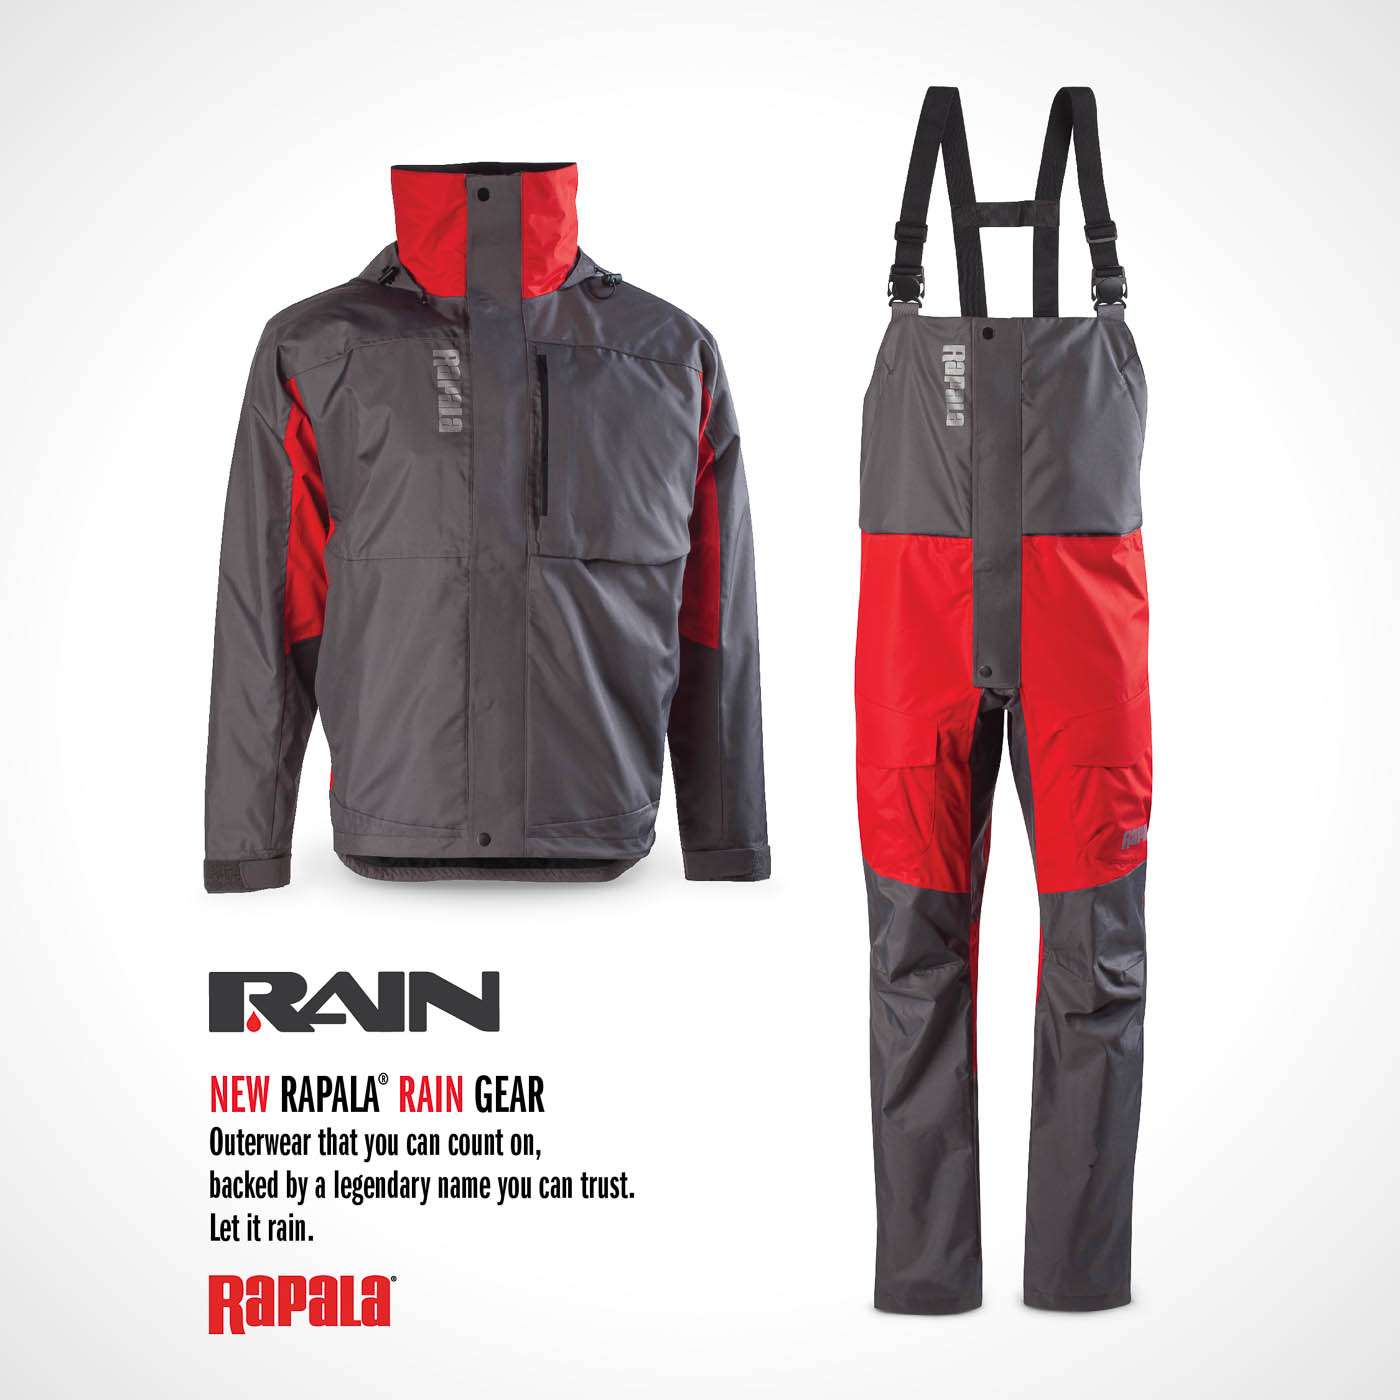 <p><strong>Rapala Rain Series</strong></p><p>The Rapala Rain Jacket and Bib Series combine advanced technology performance with upgraded waterproof and breathable components for more extreme conditions. Suit features mid-weight two-layer construction, with a 100 percent polyester Oxford/Polyester Honey Taslan/Polyester mesh lining. Fully taped sealed seams, premium YKK zippers, and reflective Rapala logos are other features. So are adjustable drawstrings, two-way hood, waist, outer chest zip pocket, hand warming pockets and interior pockets. $149.99. <a href=